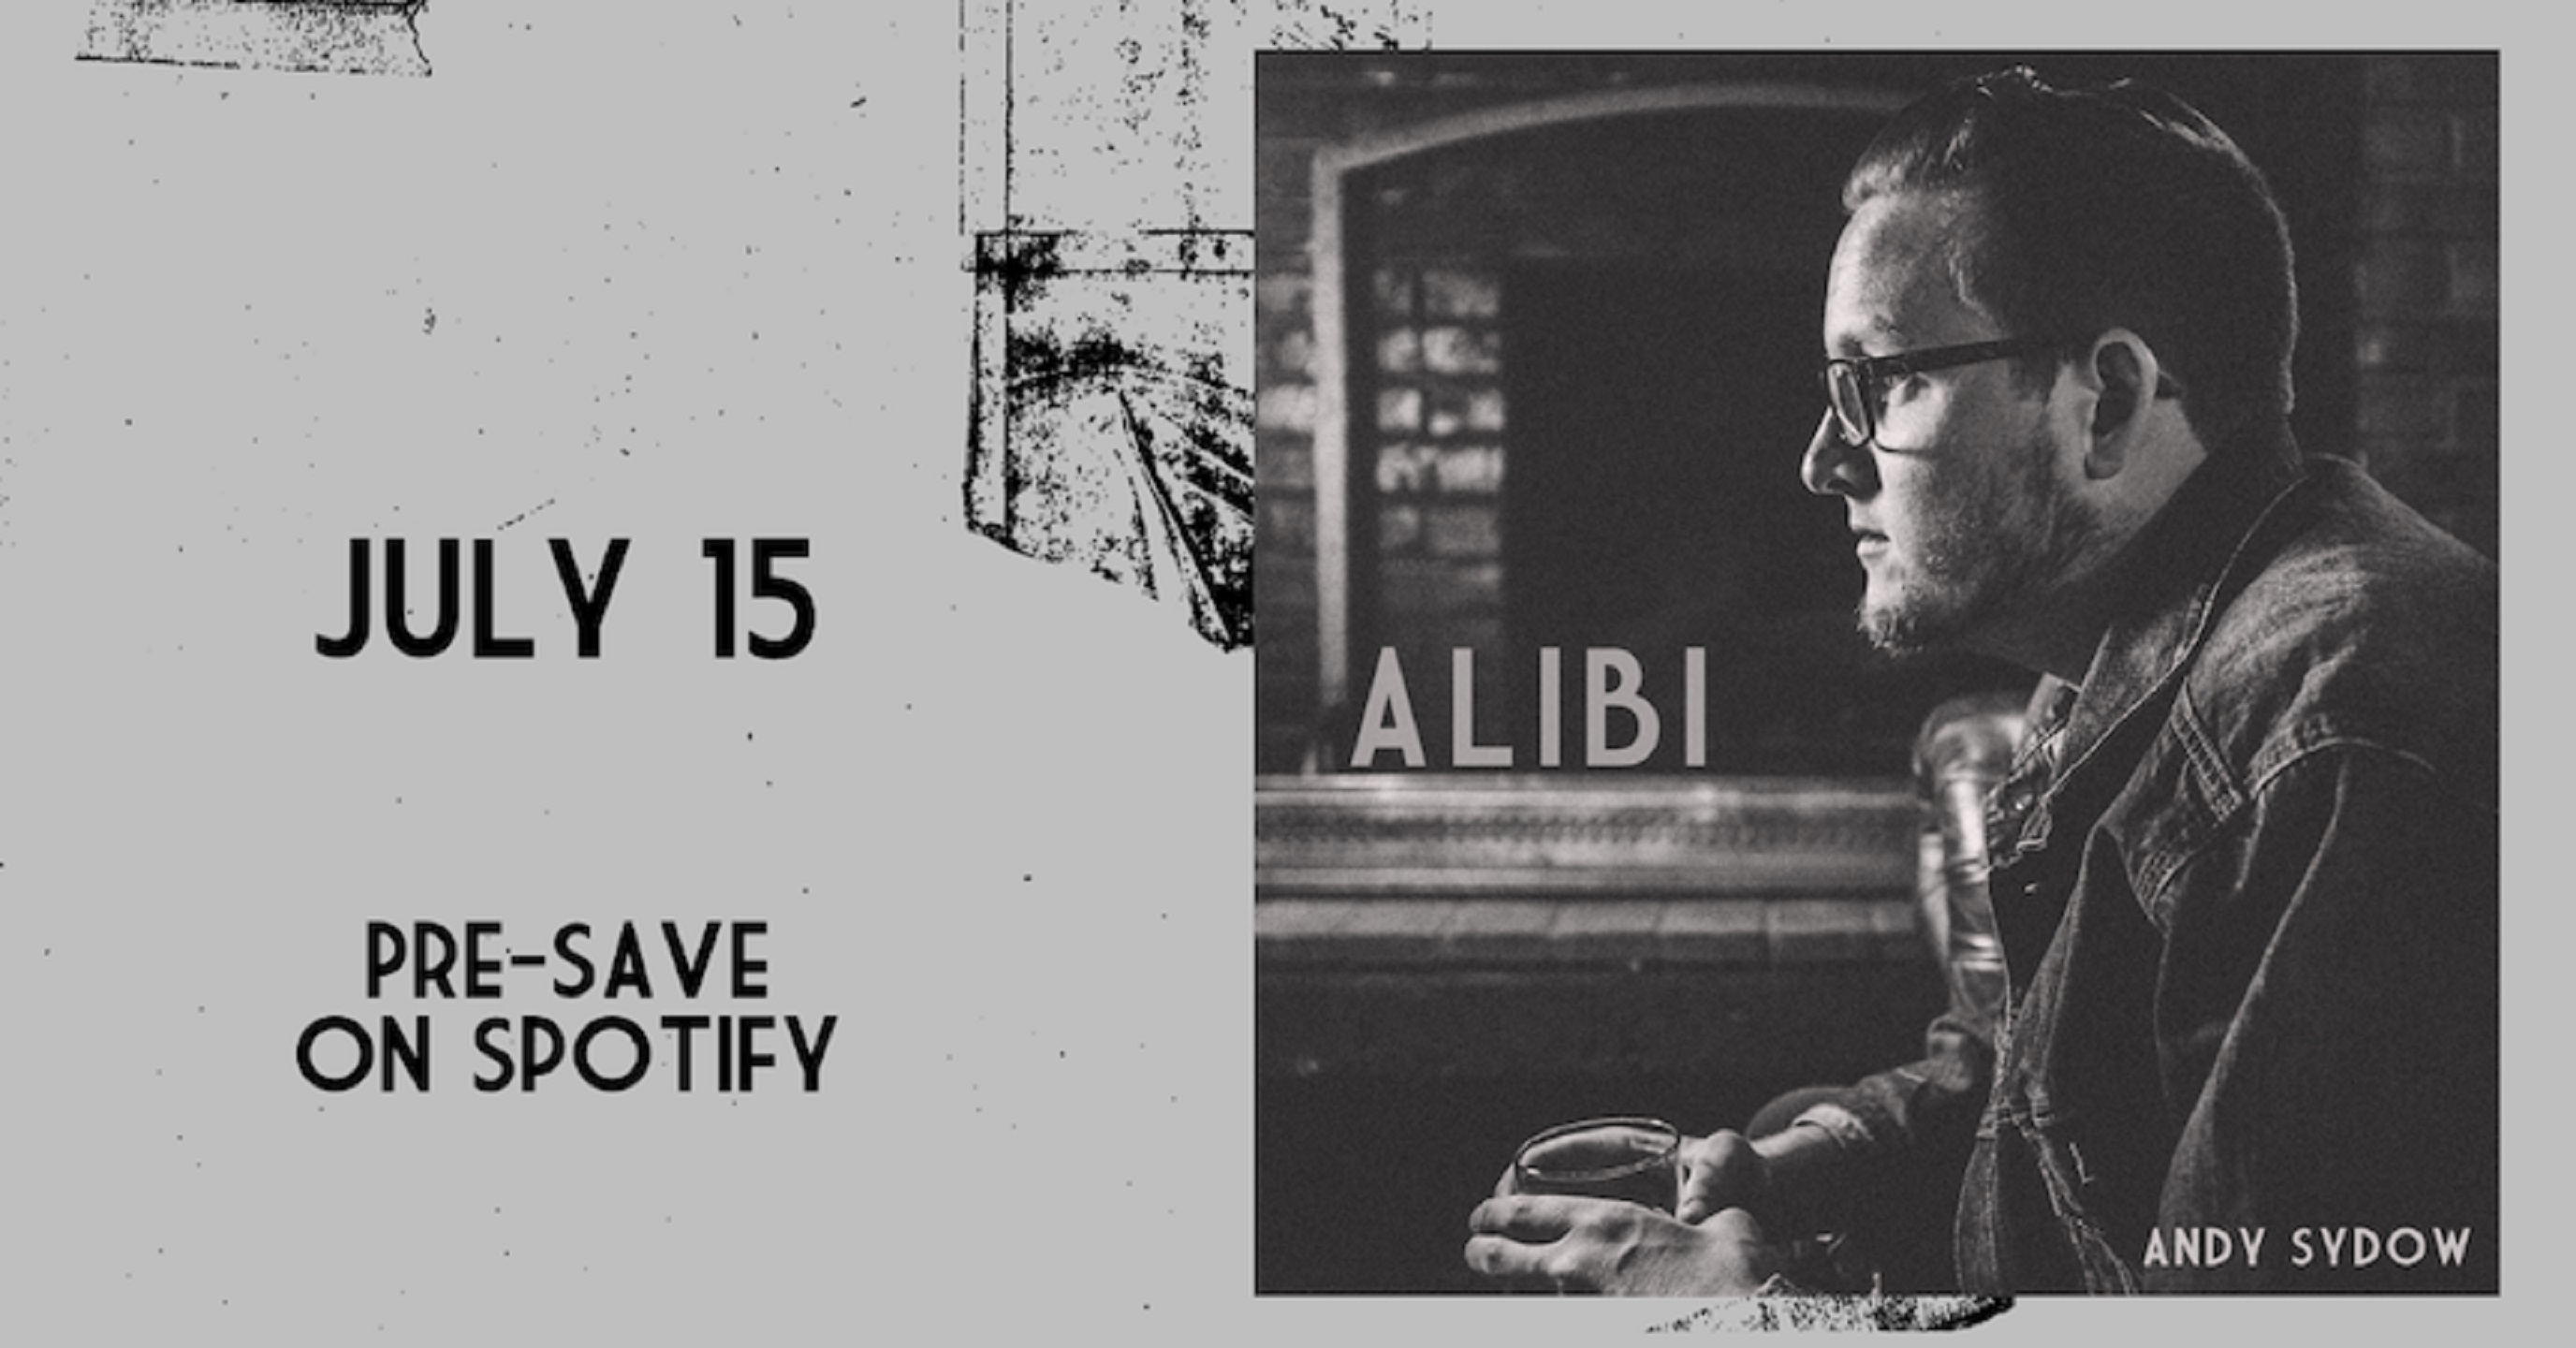 Andy Sydow Sets Out Solo With Newly Fashioned Single “Alibi”